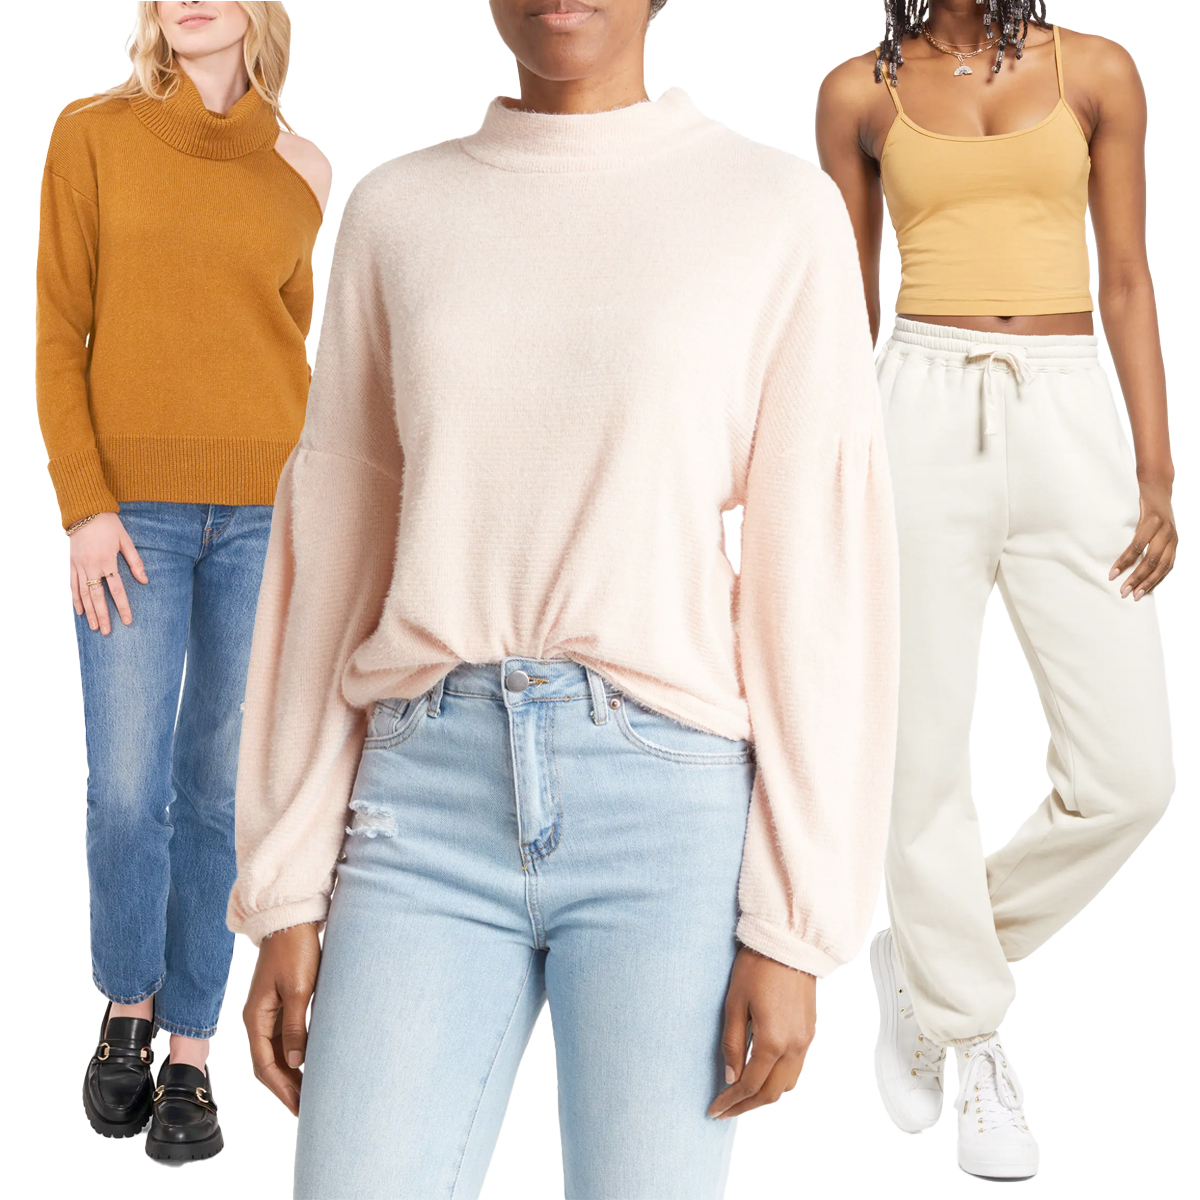 Nordstrom Rack Clear the Rack Sale: Get a $79 Sweater for $7, $6 Dresses, $3 Tops & More – E! Online